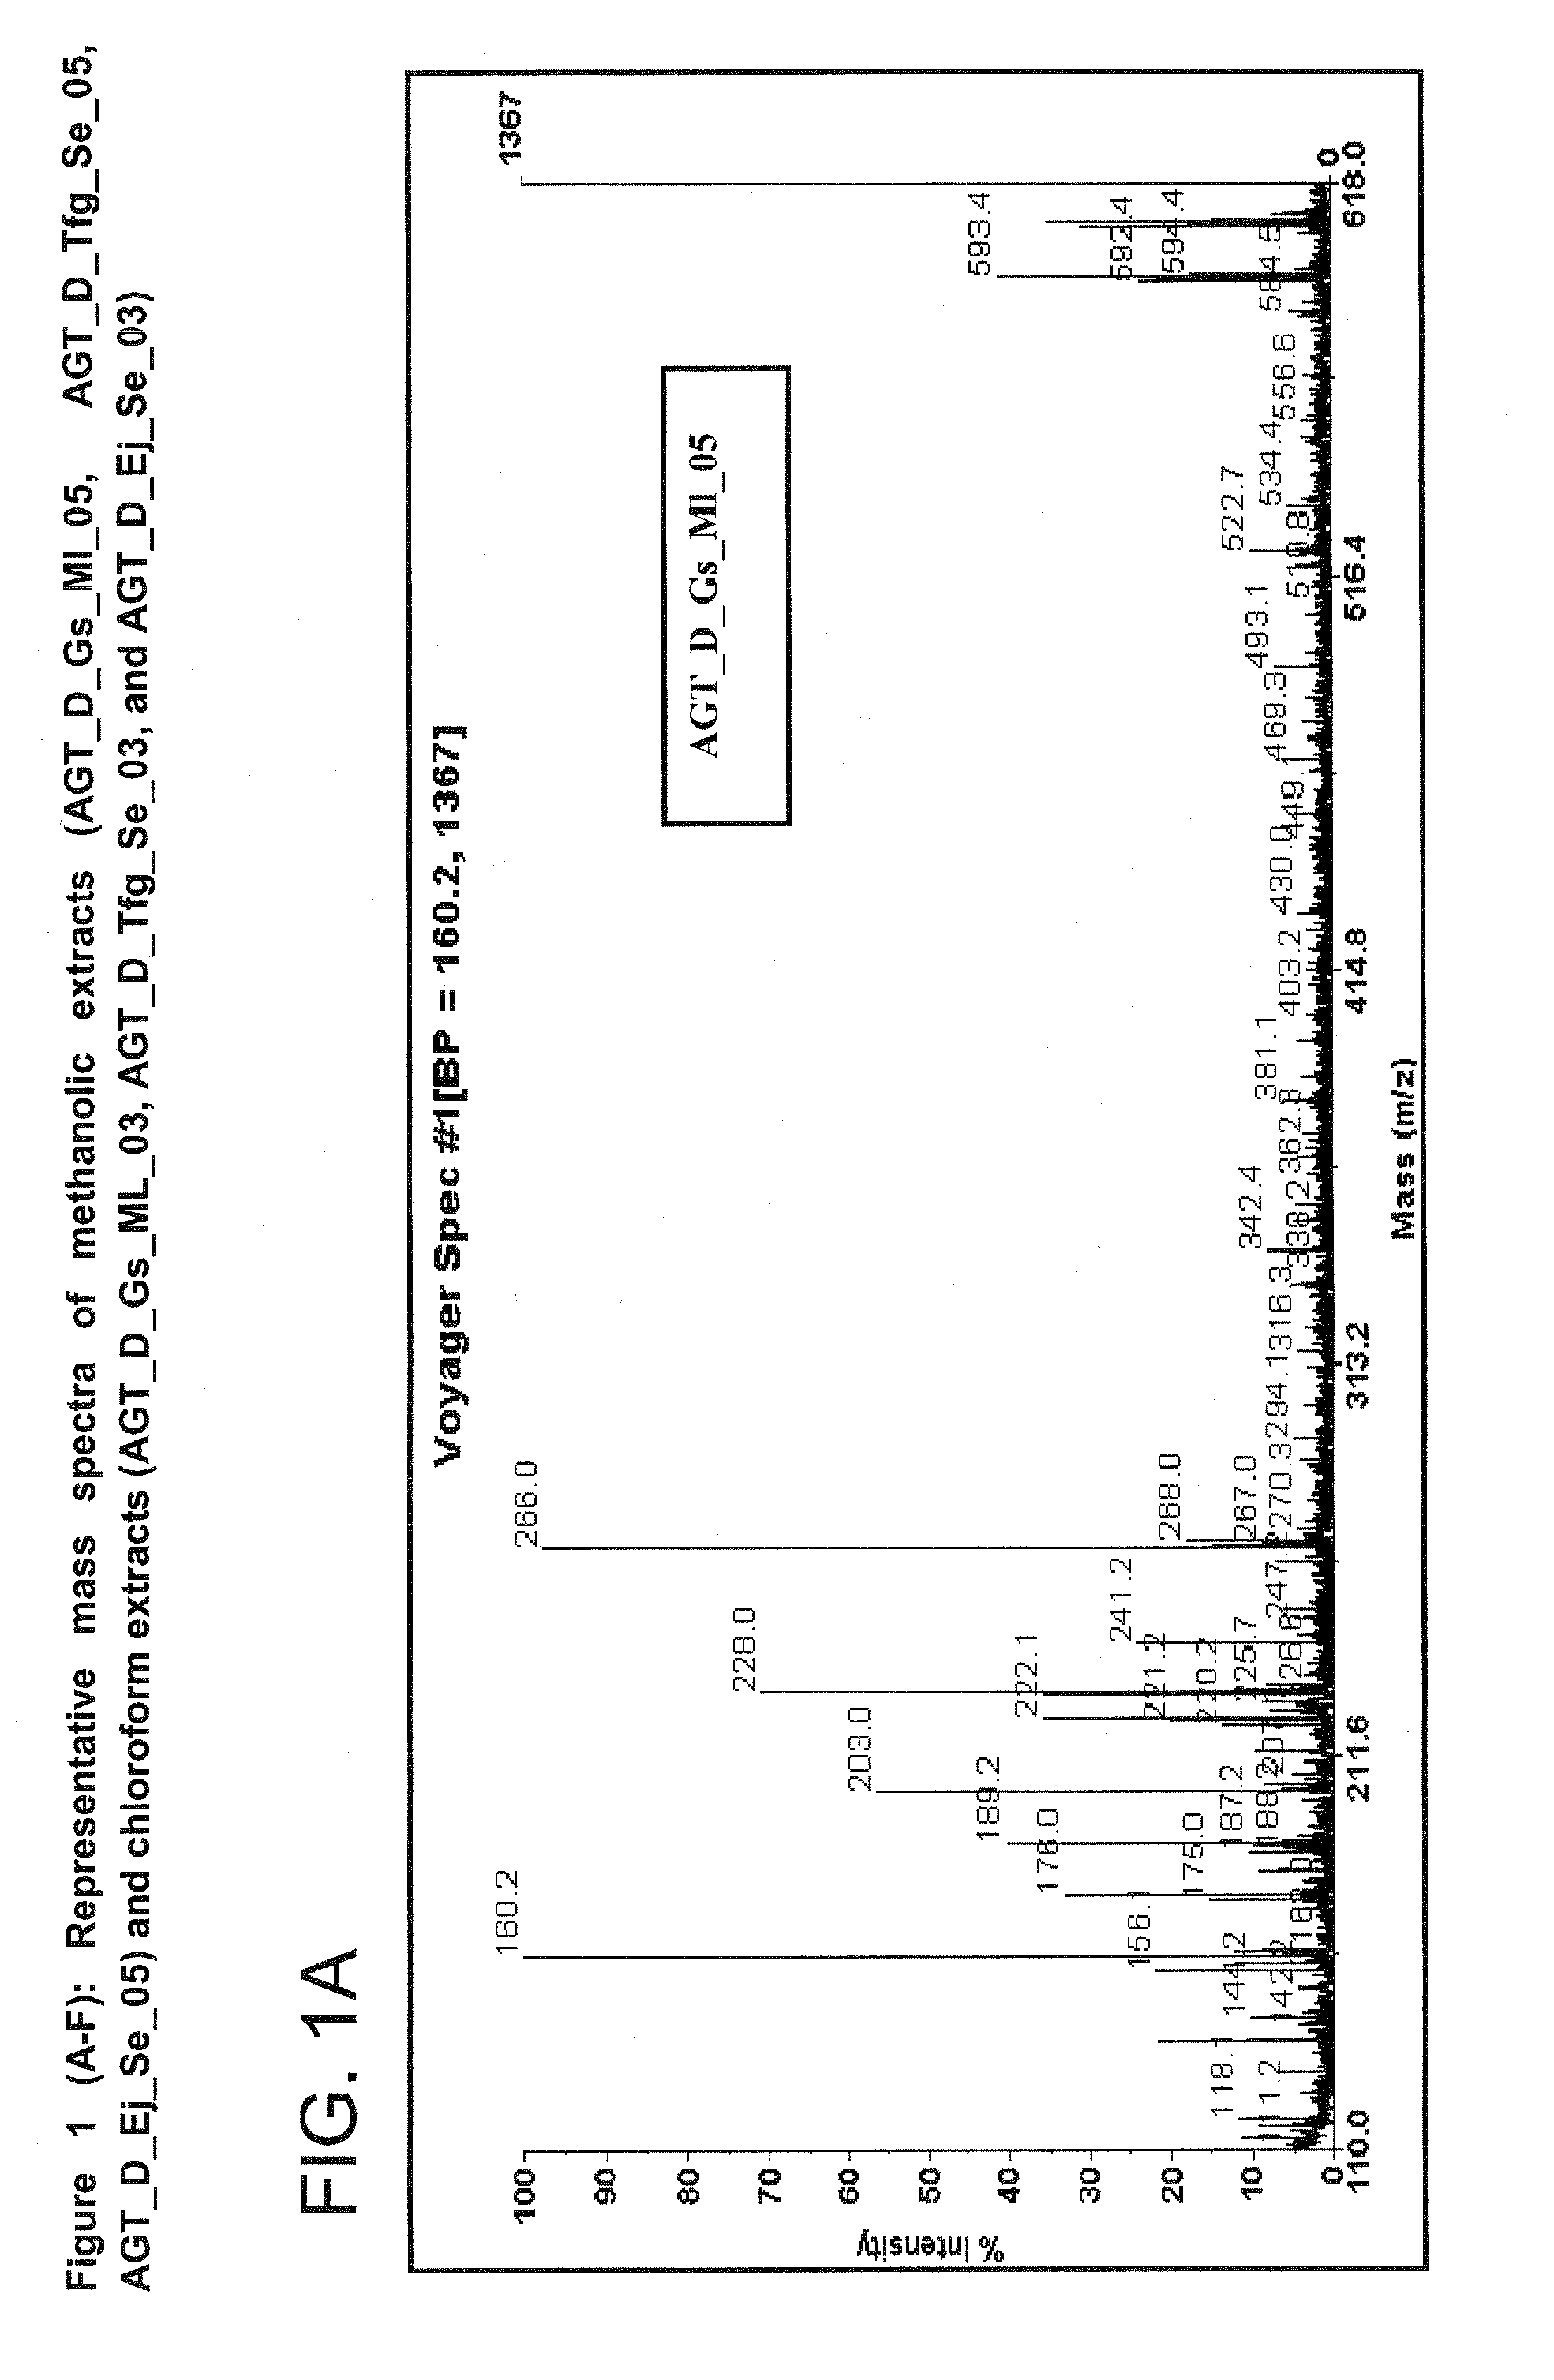 Screening Method (Metabolite Grid) for Therapeutic Extracts and Molecules for Diabetes